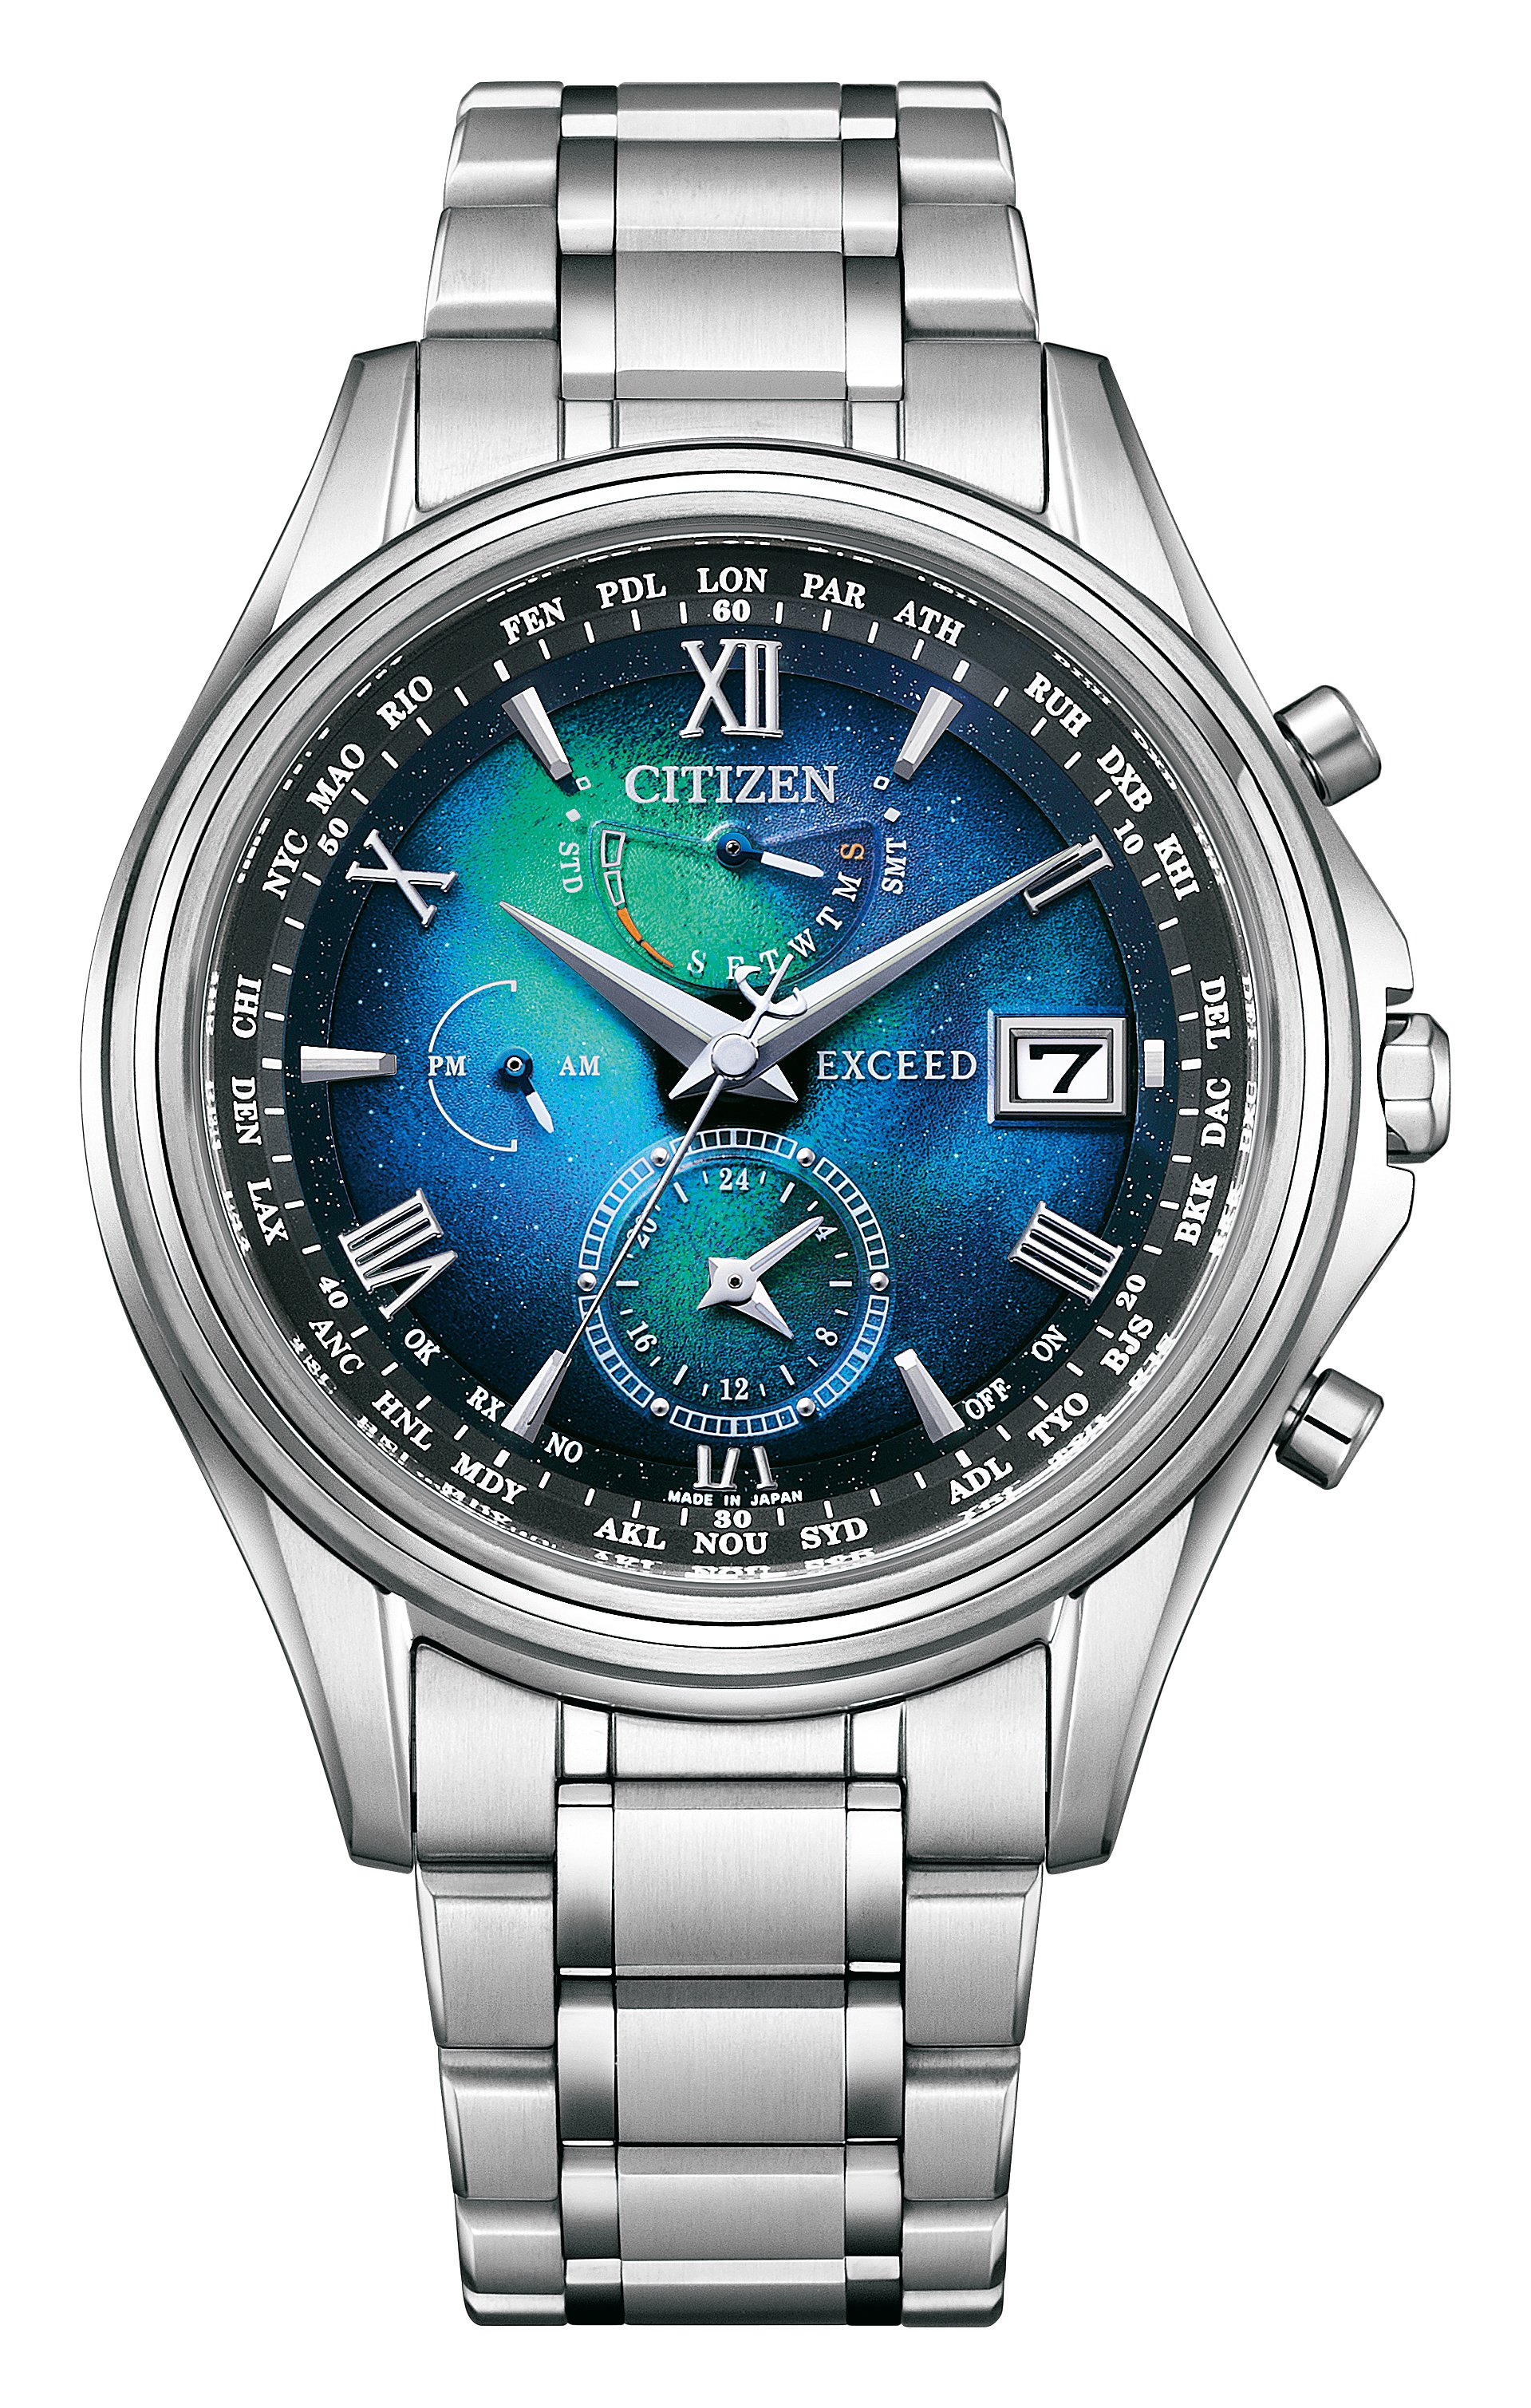 Citizen Eco-Drive 365 – Professional Watches